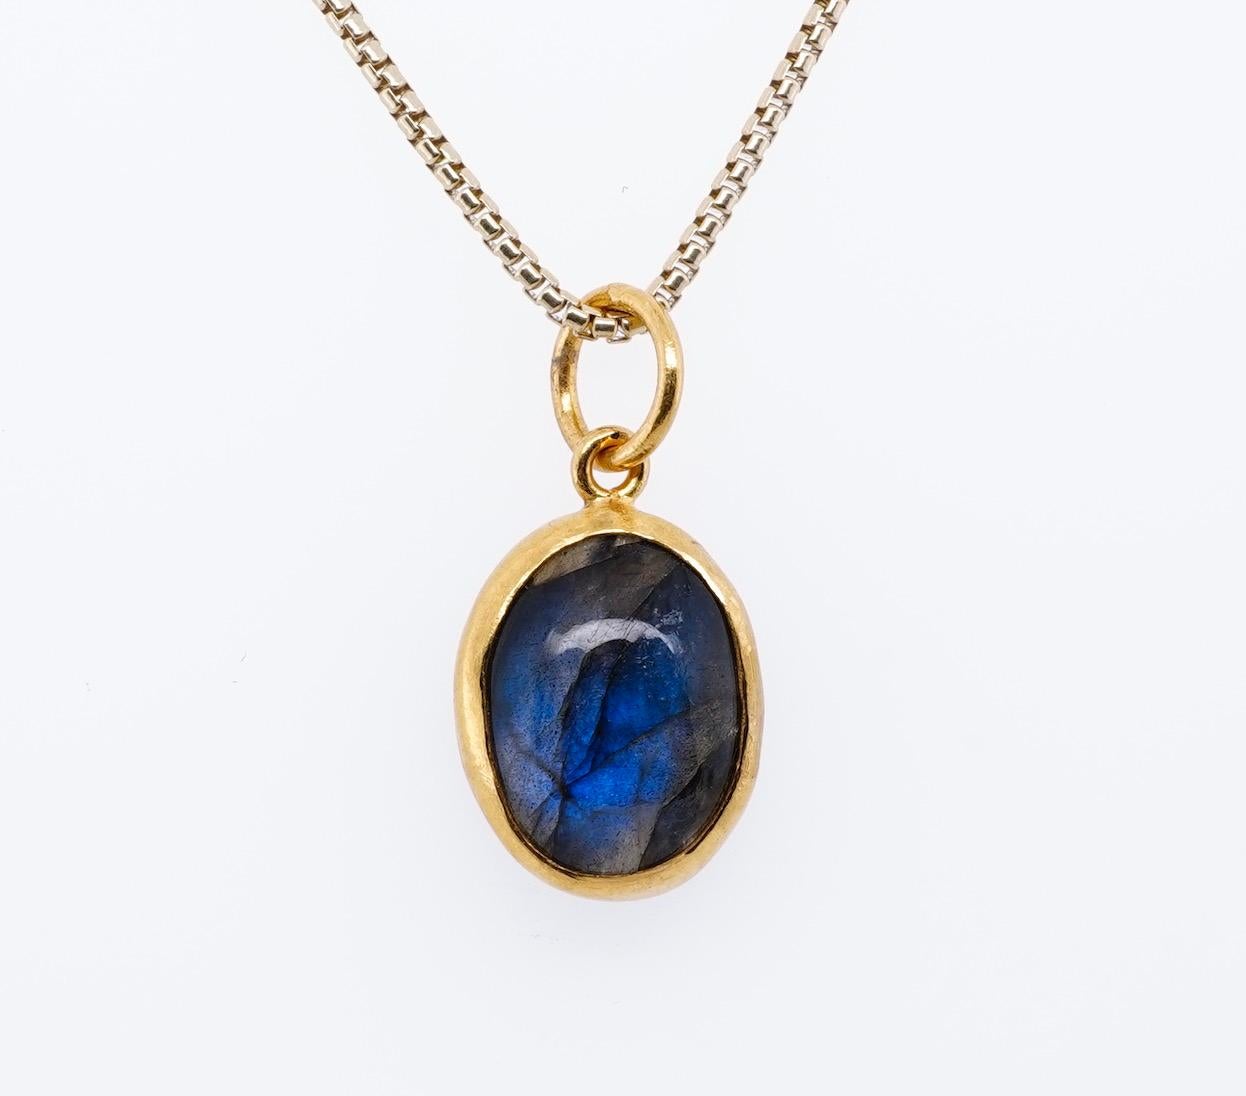 Smooth, Oval 5.45 Ct Labradorite Charm Pendant Necklace, 24kt Solid Gold For Sale 4